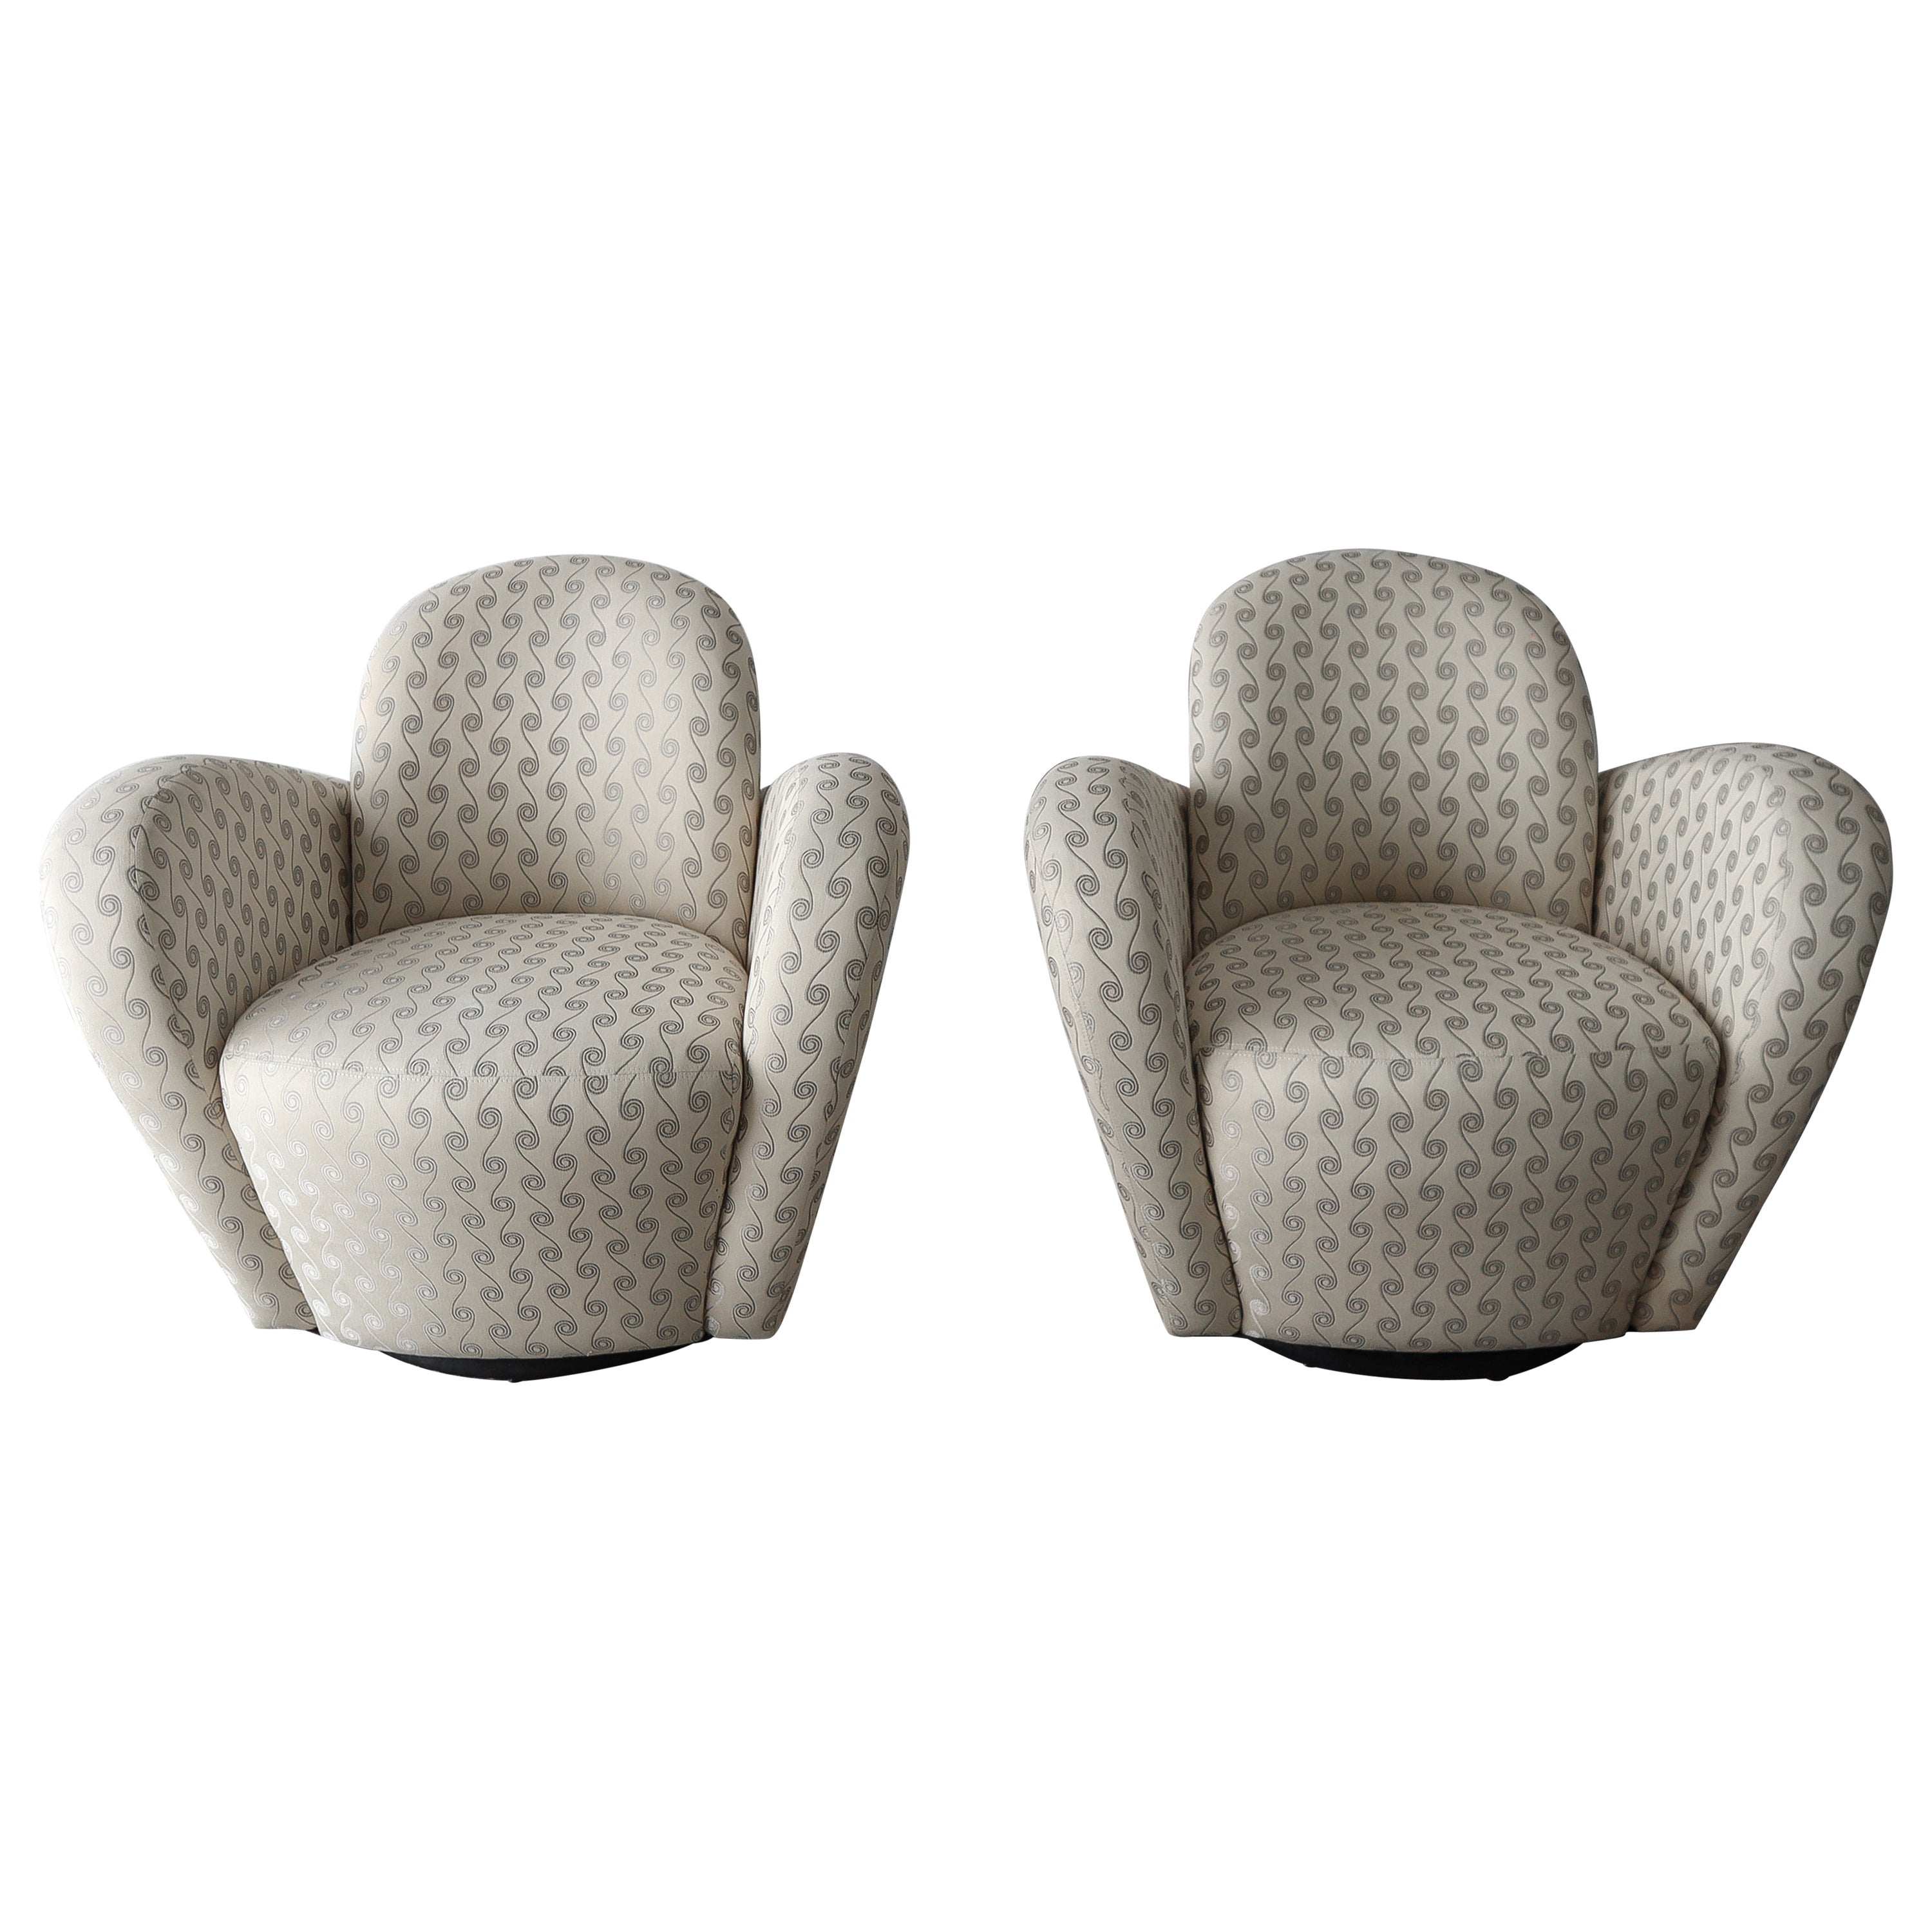 Pair of Post Modern Swivel Chairs by Michael Wolk For Sale